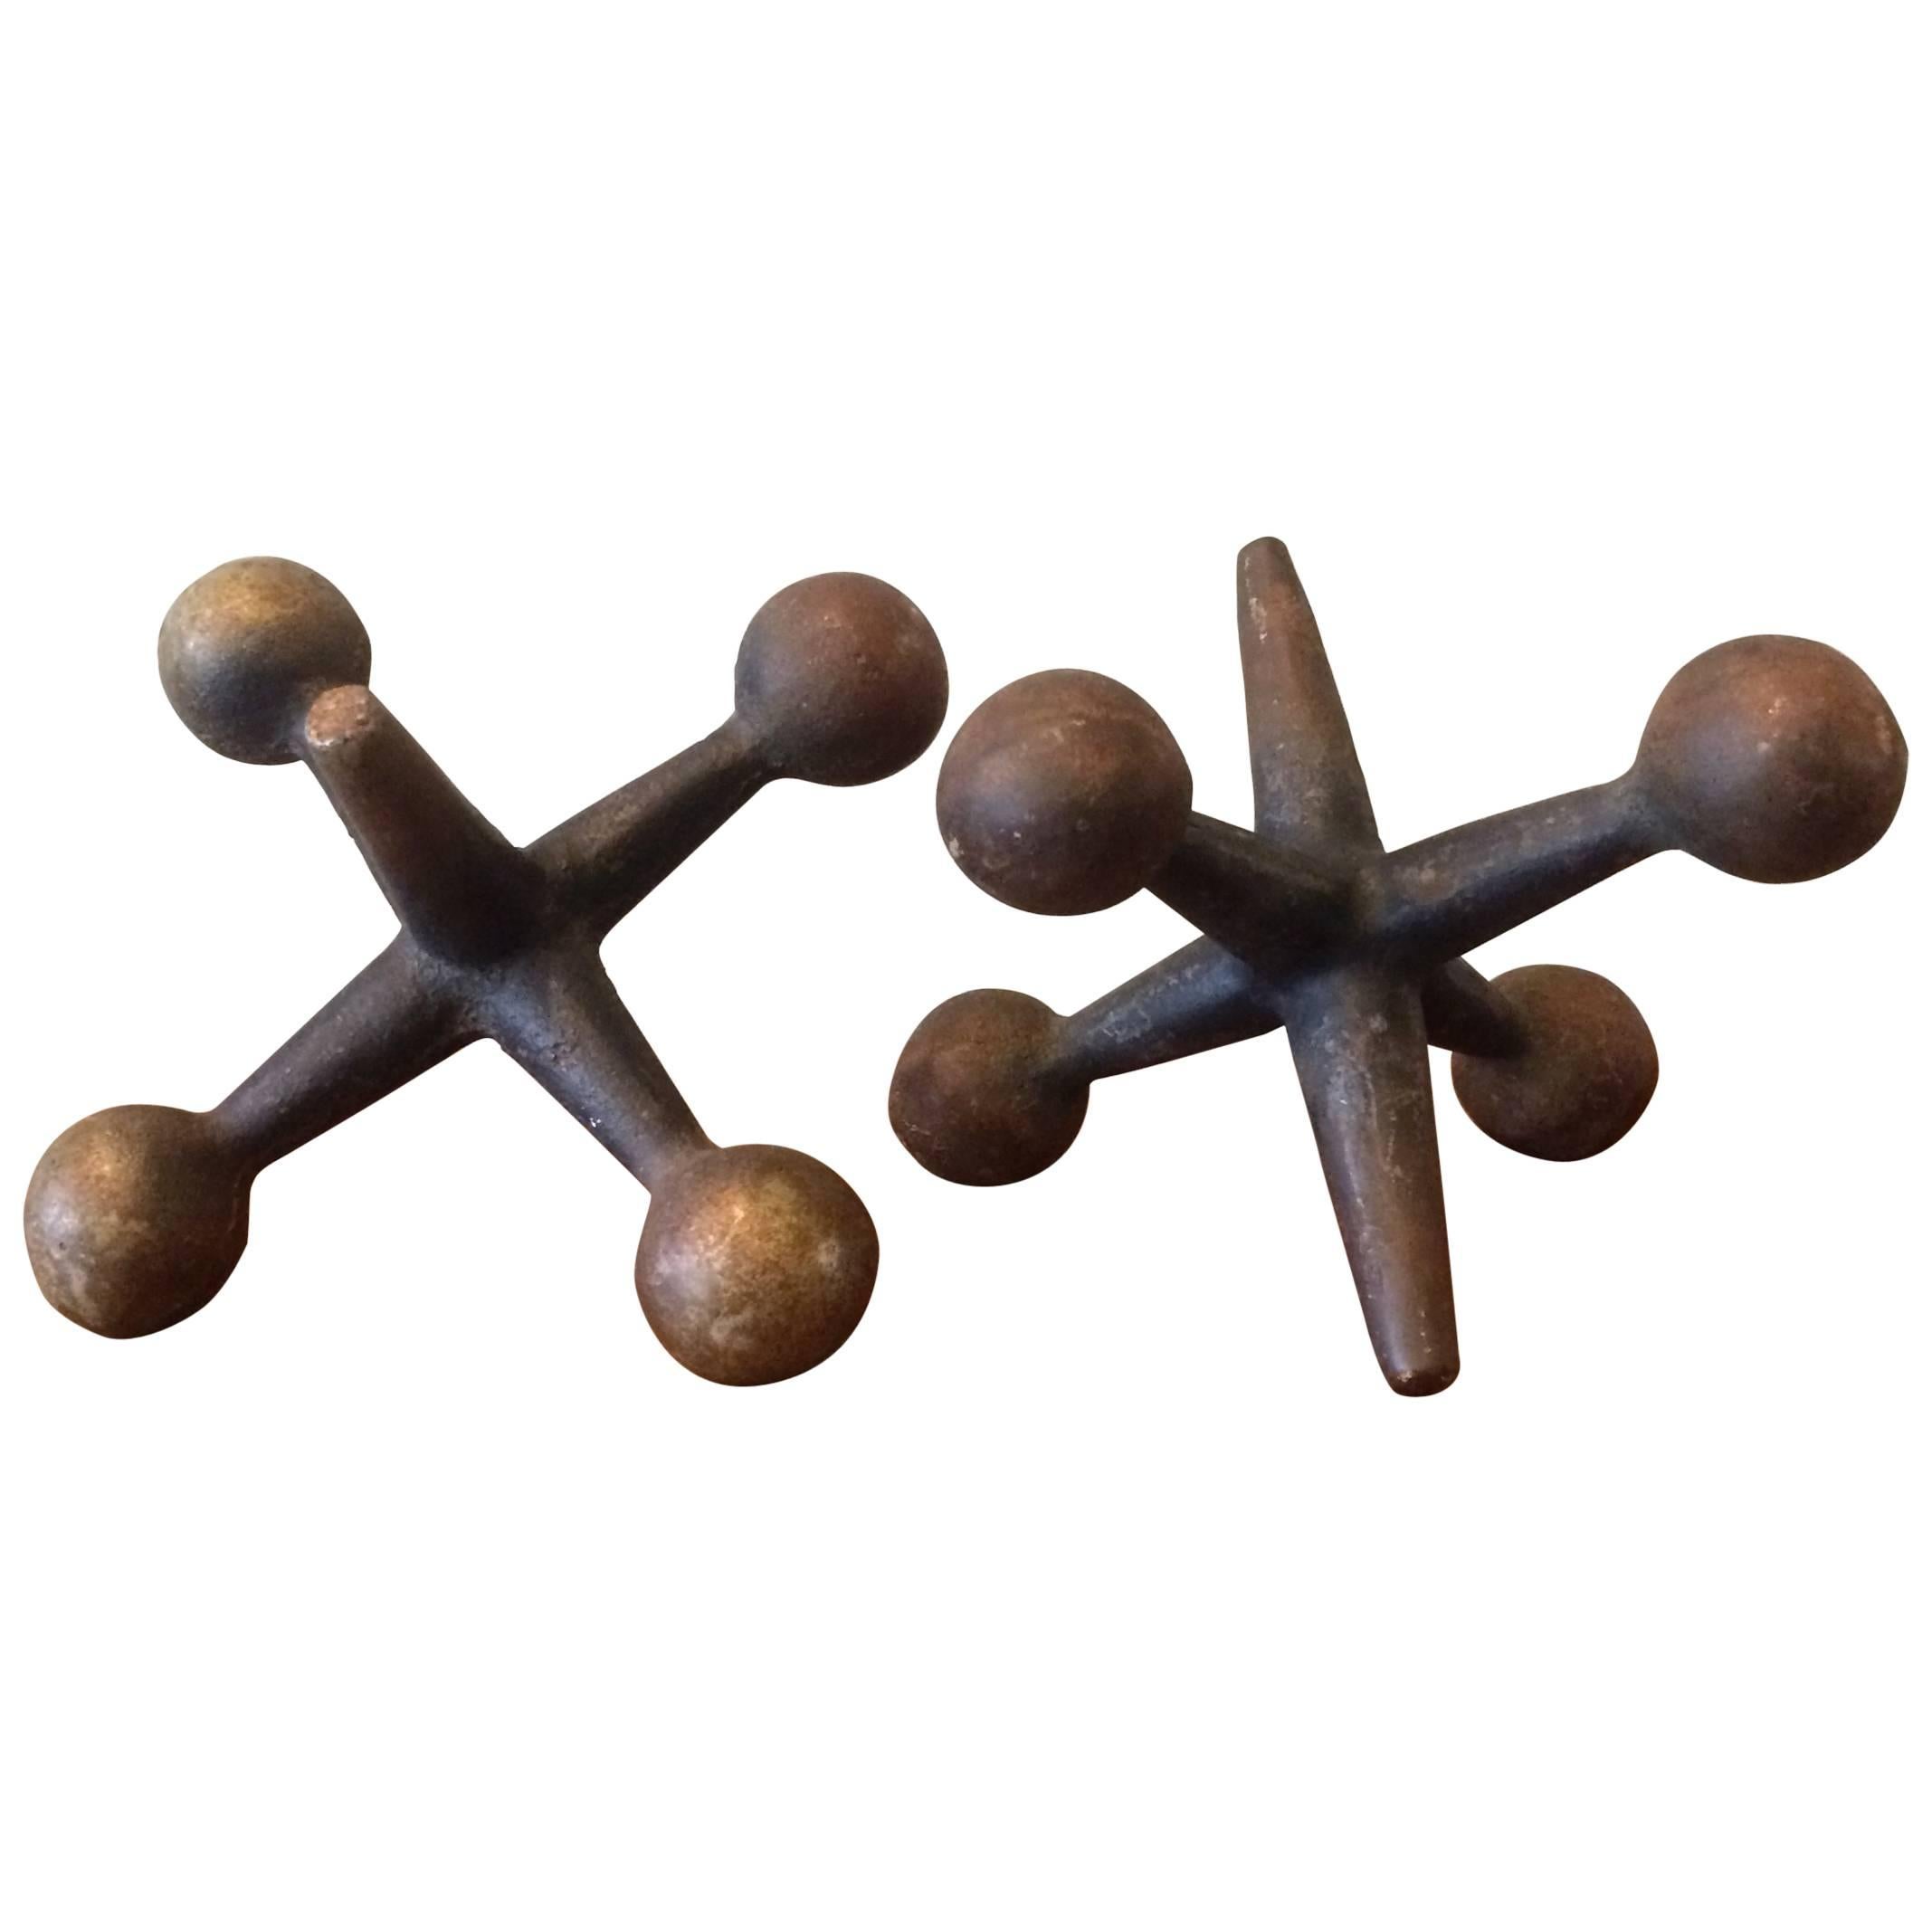 Pair of Large Mid-Century Cast Iron Jacks or Bookends